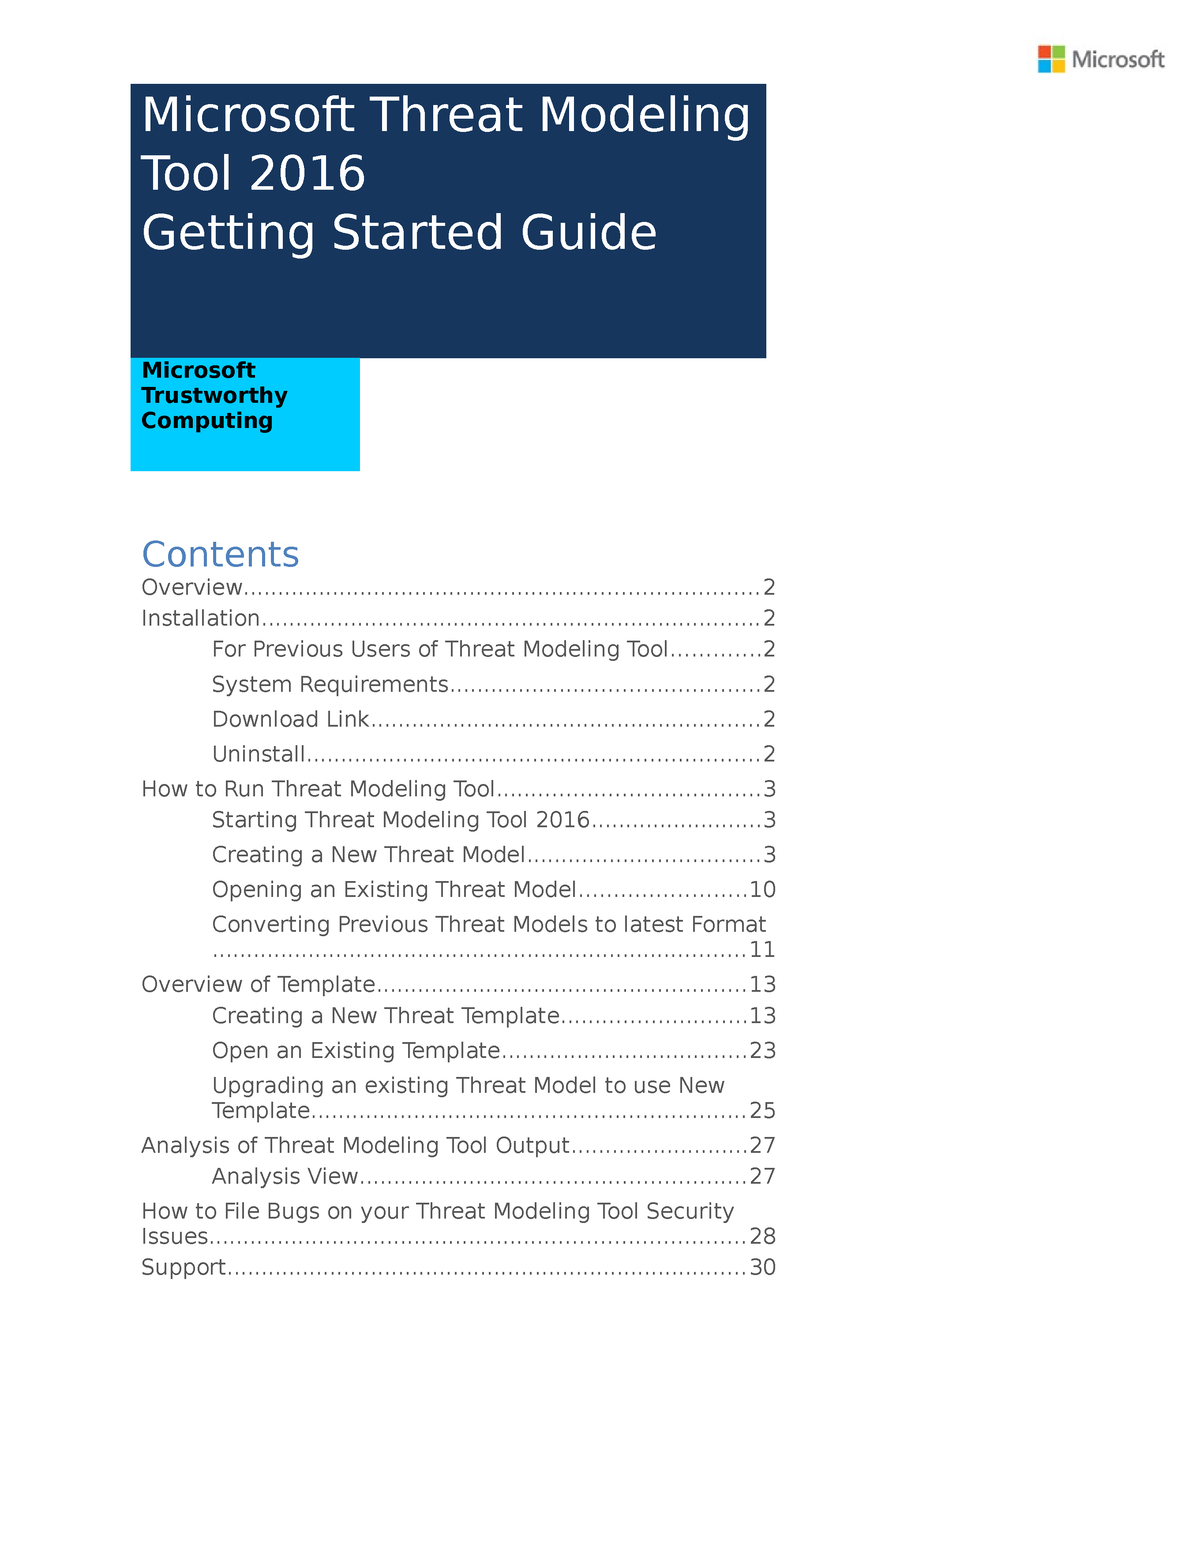 Threat Modeling Tool 2016 Getting Started Guide - Microsoft Threat ...